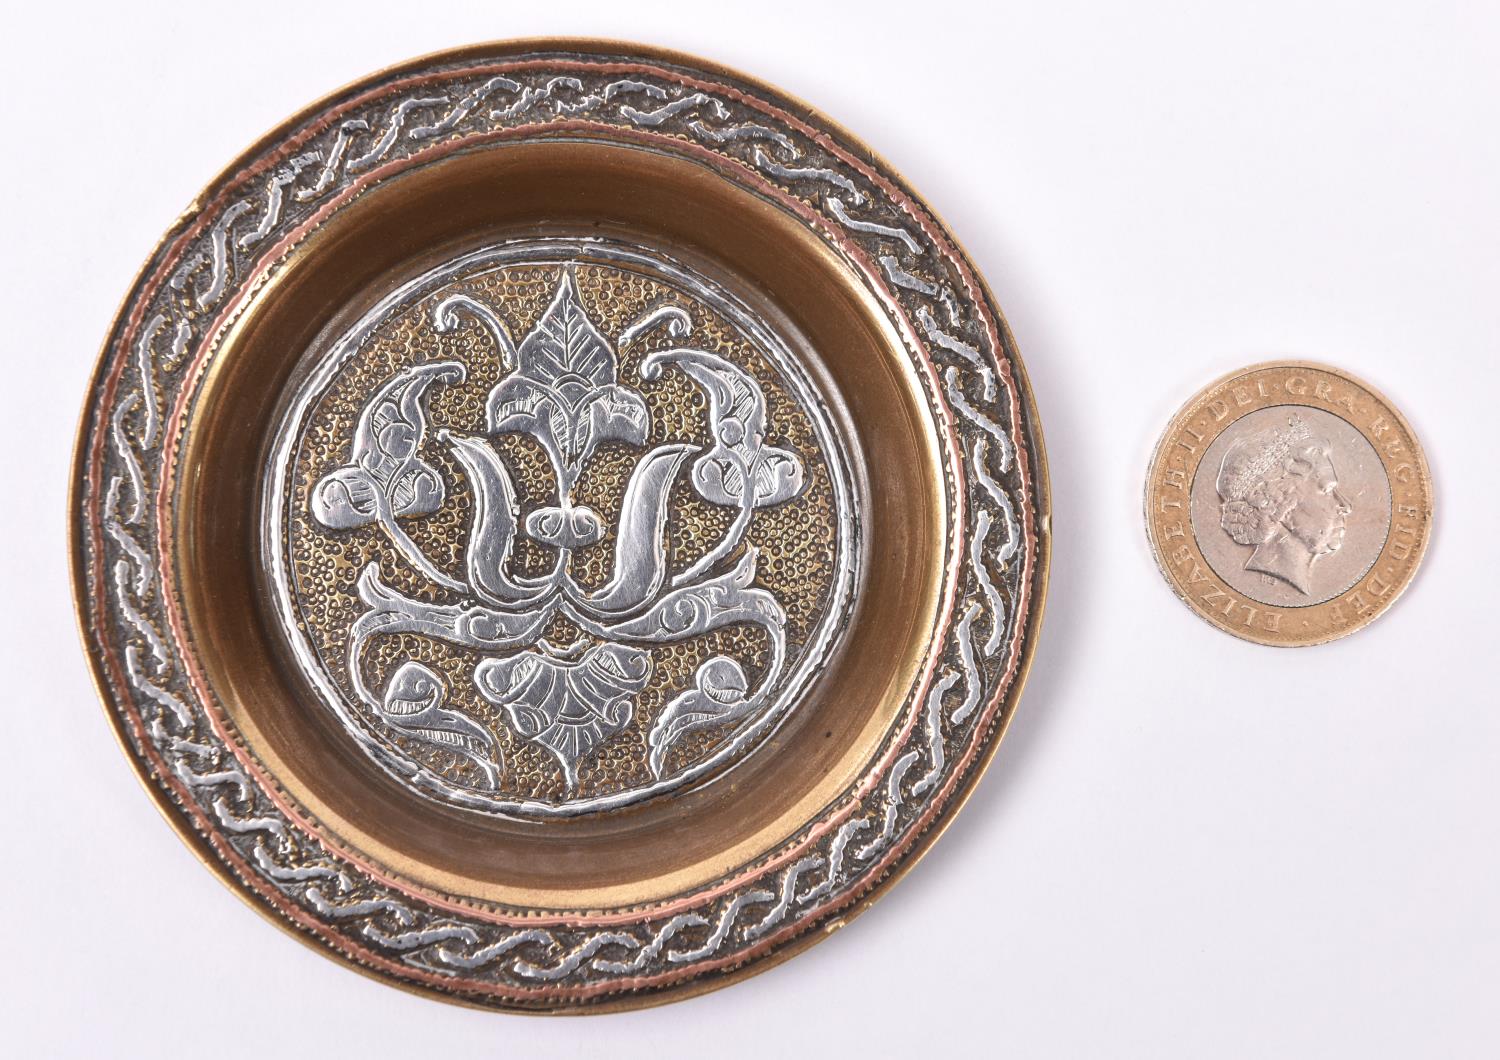 A large 19th Century Cairoware tray set. Of possibly Egypt, Morocco or Syria Mamluk origin. - Image 6 of 10